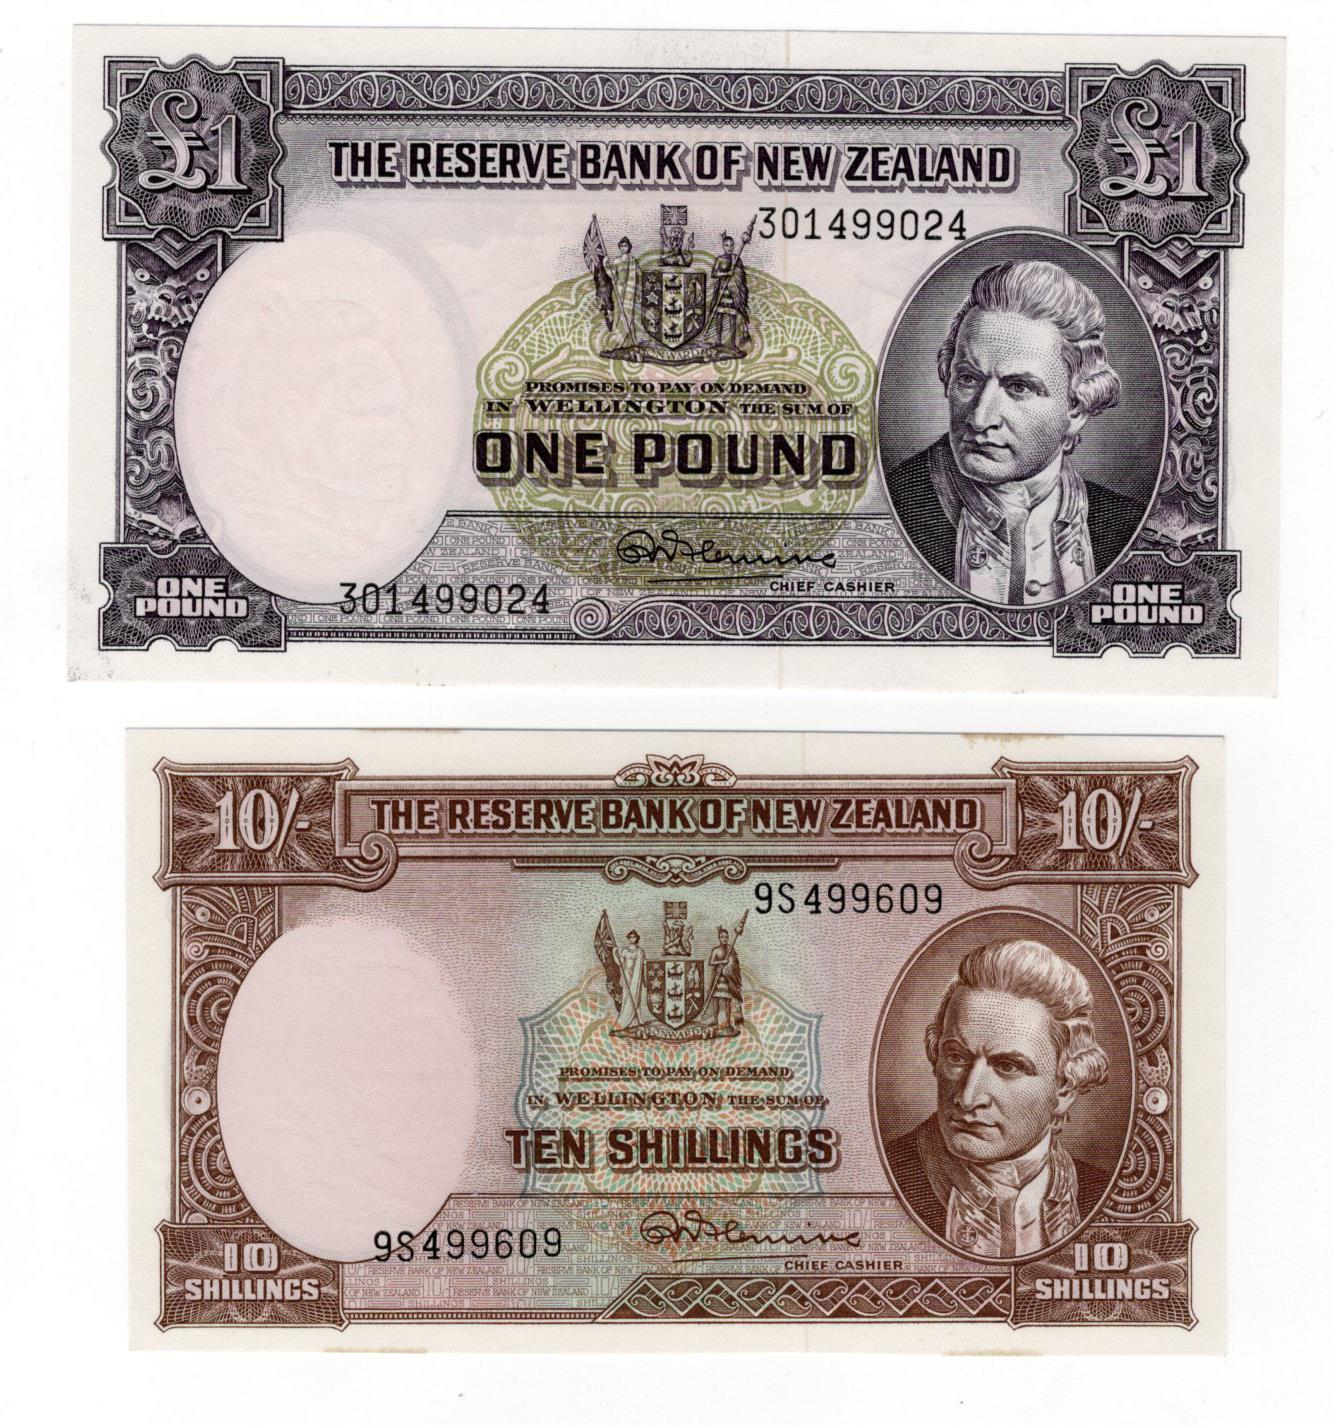 New Zealand (2), 10 Shillings and 1 Pound issued 1960 - 1967, signed R.N. Fleming, with yellow